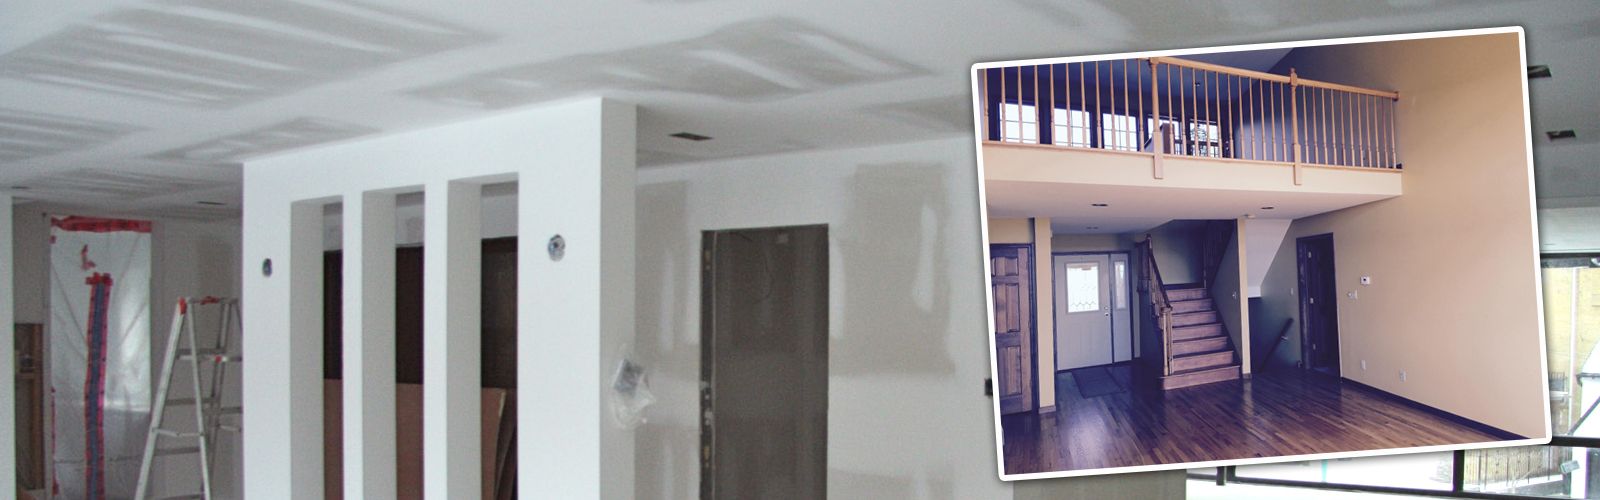 Drywall Installations Services